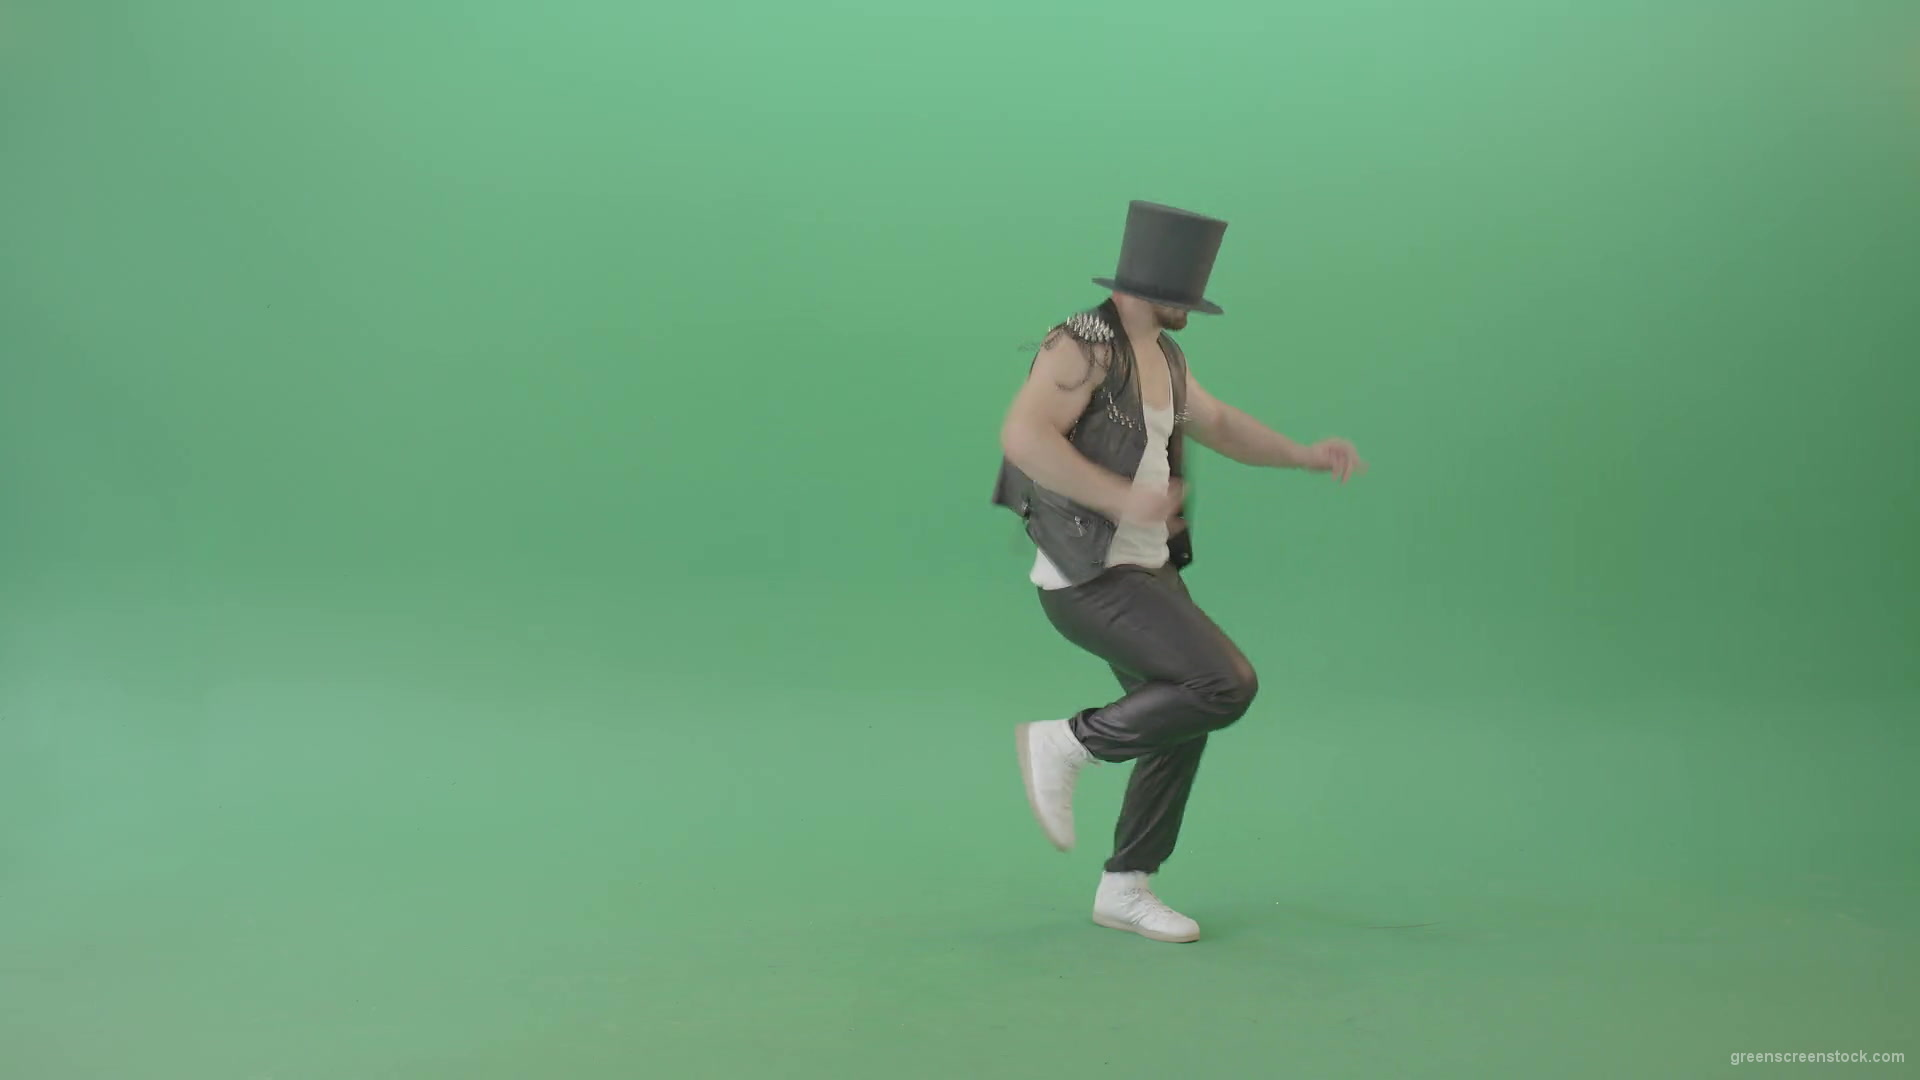 Man-in-black-Busines-Cylinder-Hat-dancing-and-jumping-in-Shuffle-dance-isolated-on-Green-Screen-4K-Video-Footage-1920_008 Green Screen Stock